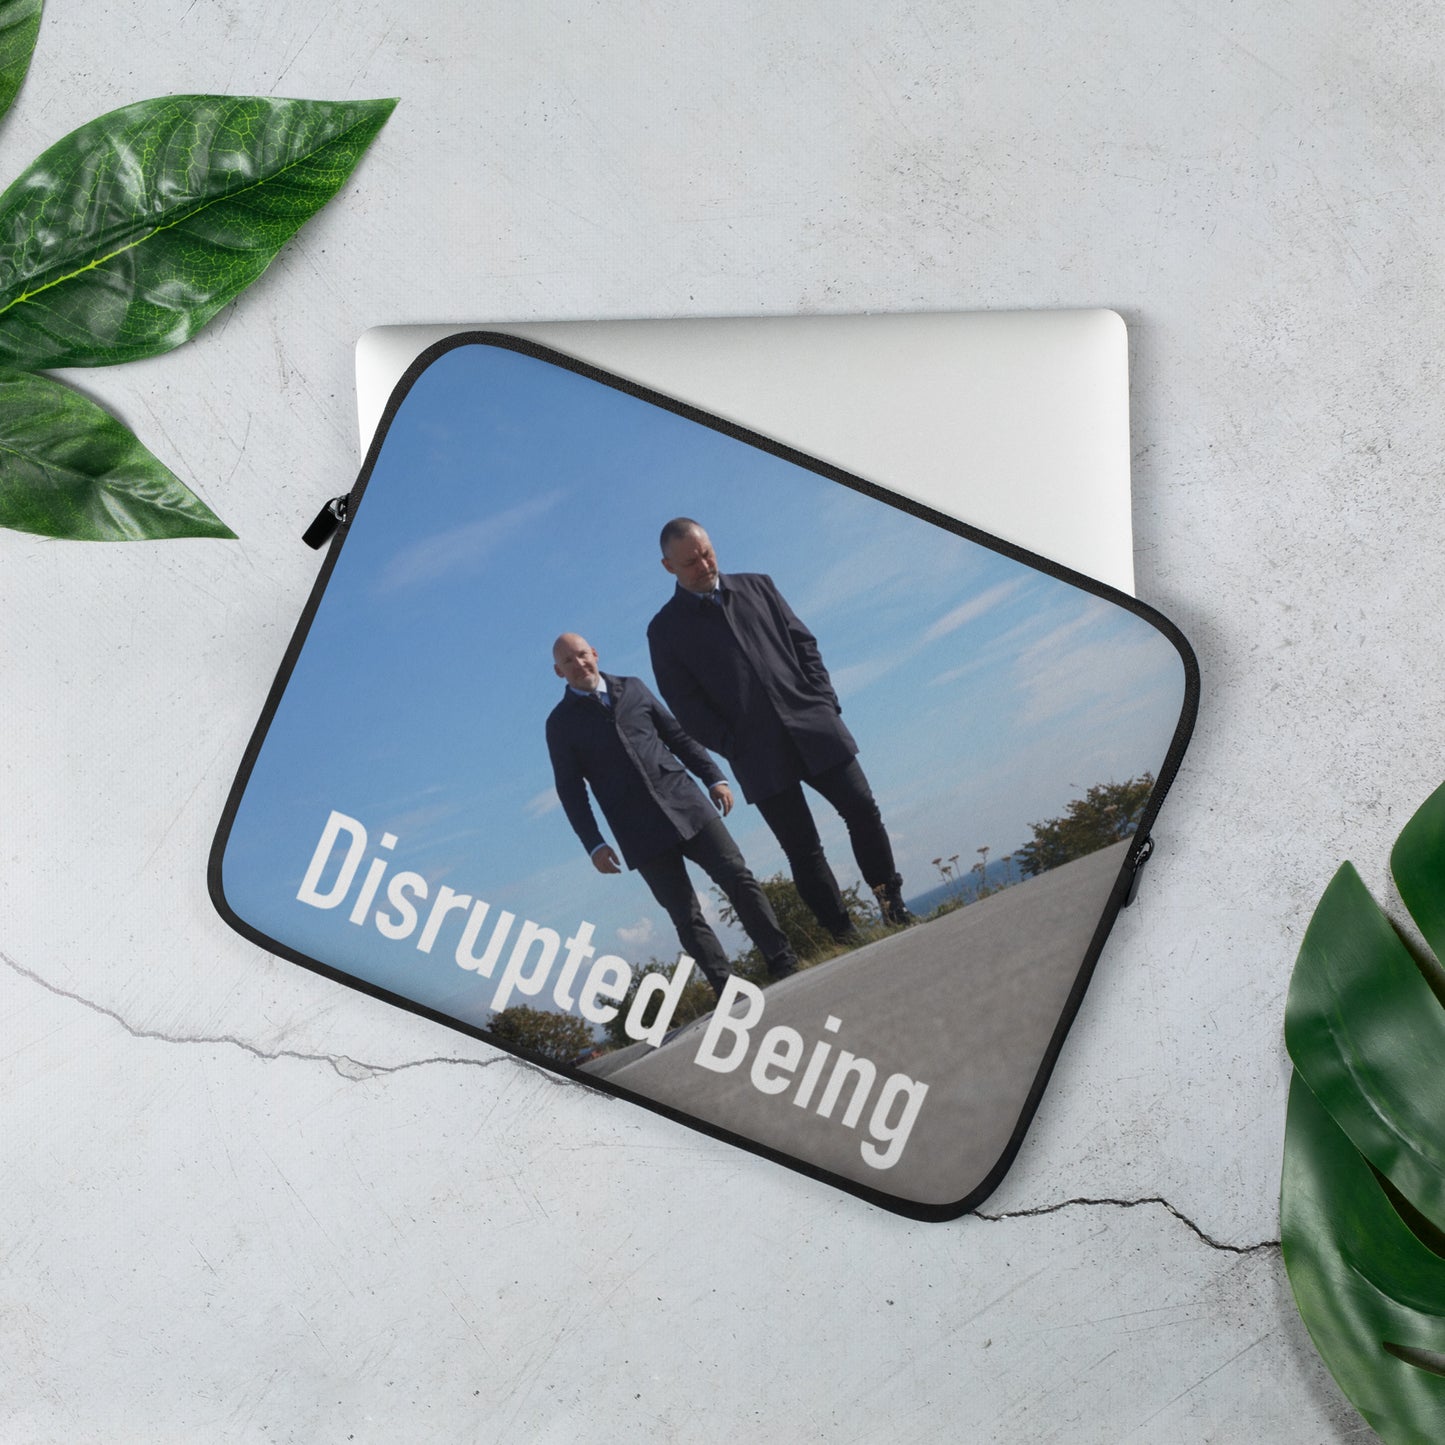 Disrupted Being, official photo and logo, Laptop Sleeve